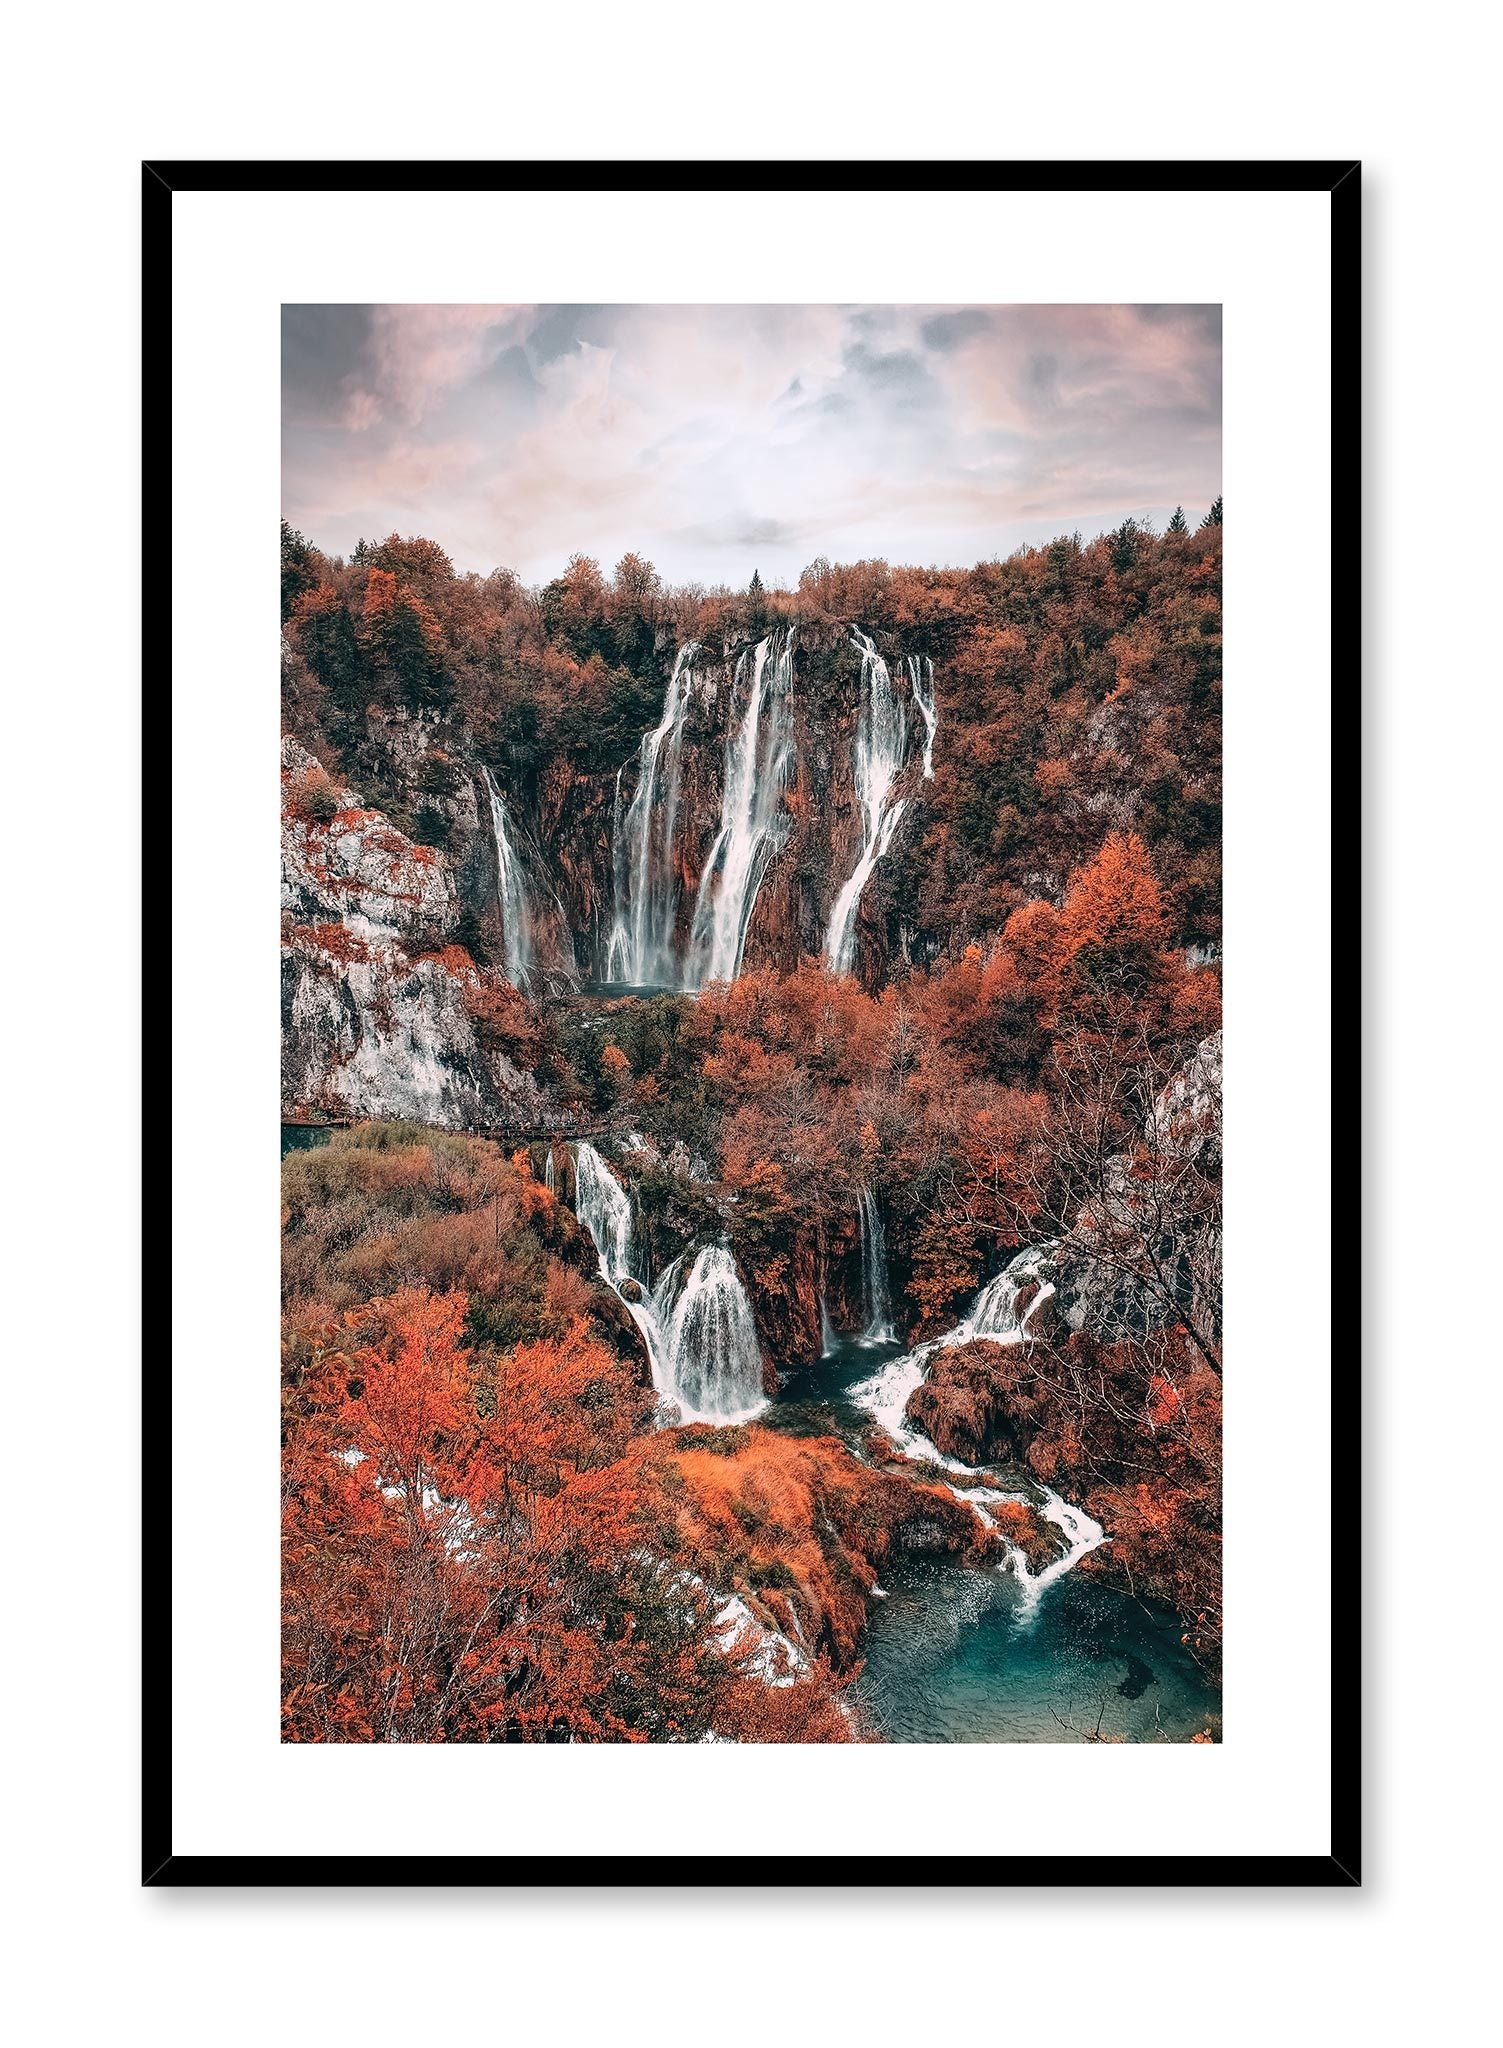 Scarlet Cascade is a minimalist photography by Opposite Wall of multiple waterfalls amidst an autumnal mountain forest with red leaves.